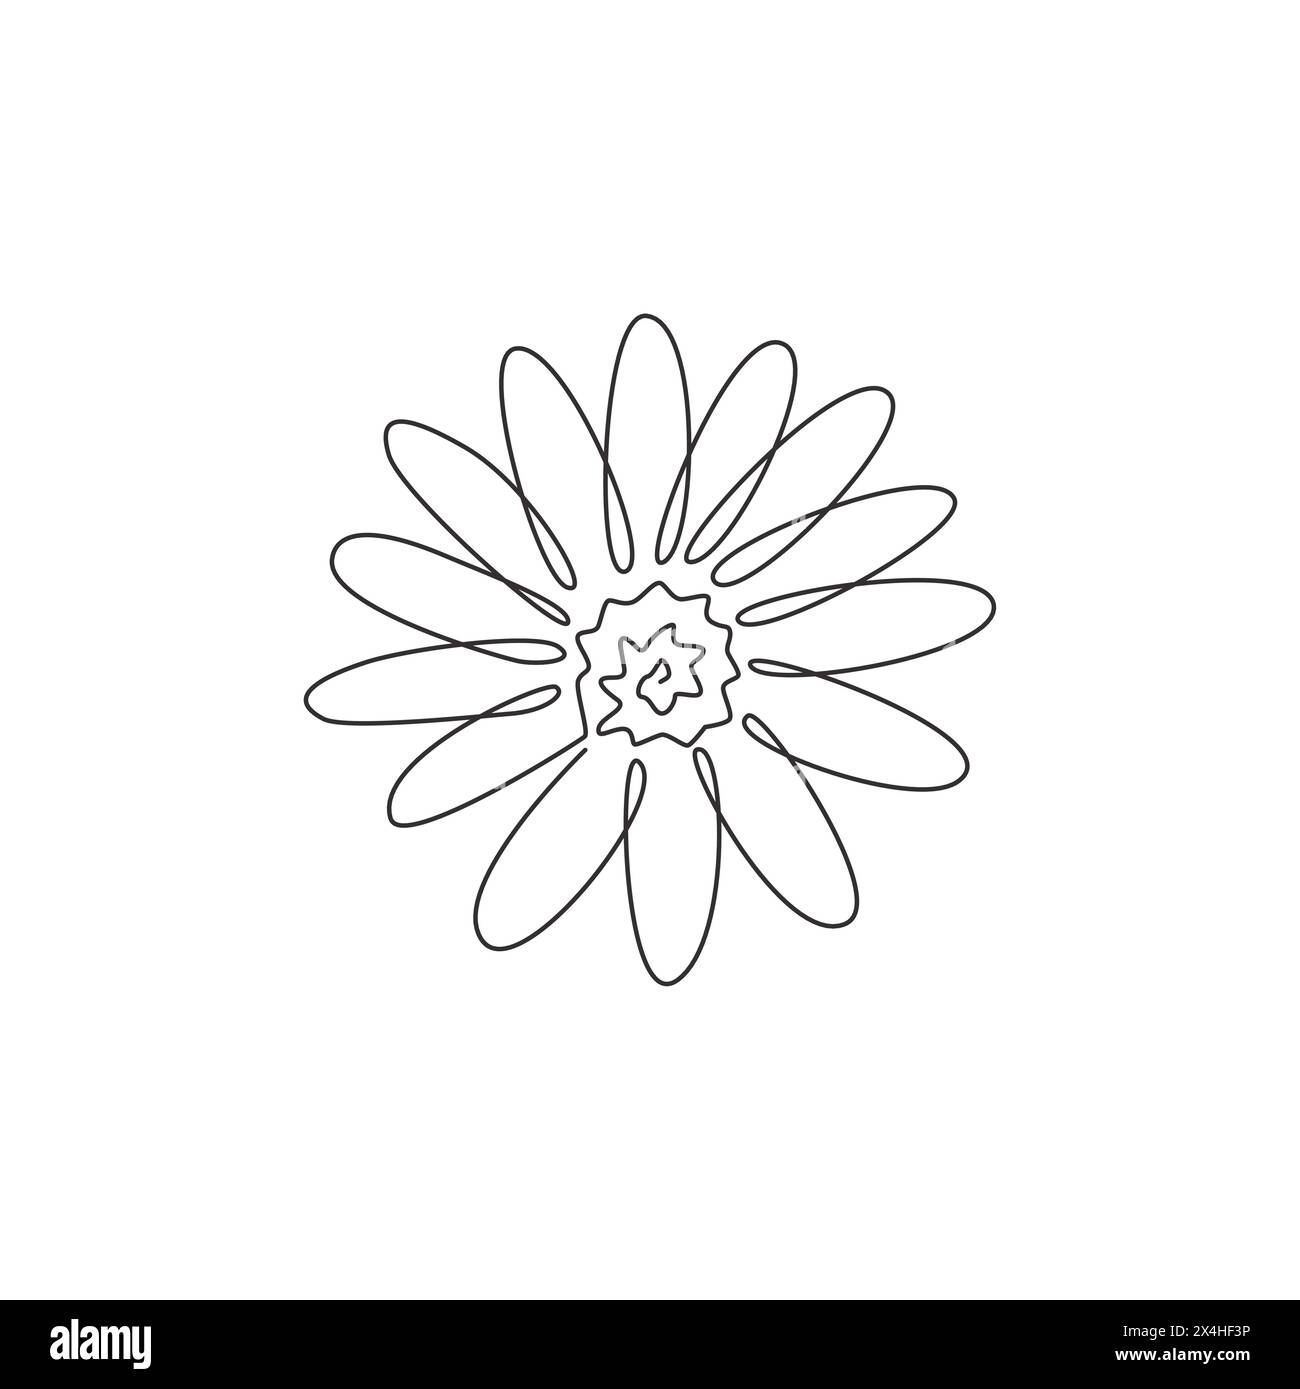 One continuous line drawing of beauty fresh bellis perennis. Printable decorative poster common daisy flower concept for wall home decor. Modern singl Stock Vector